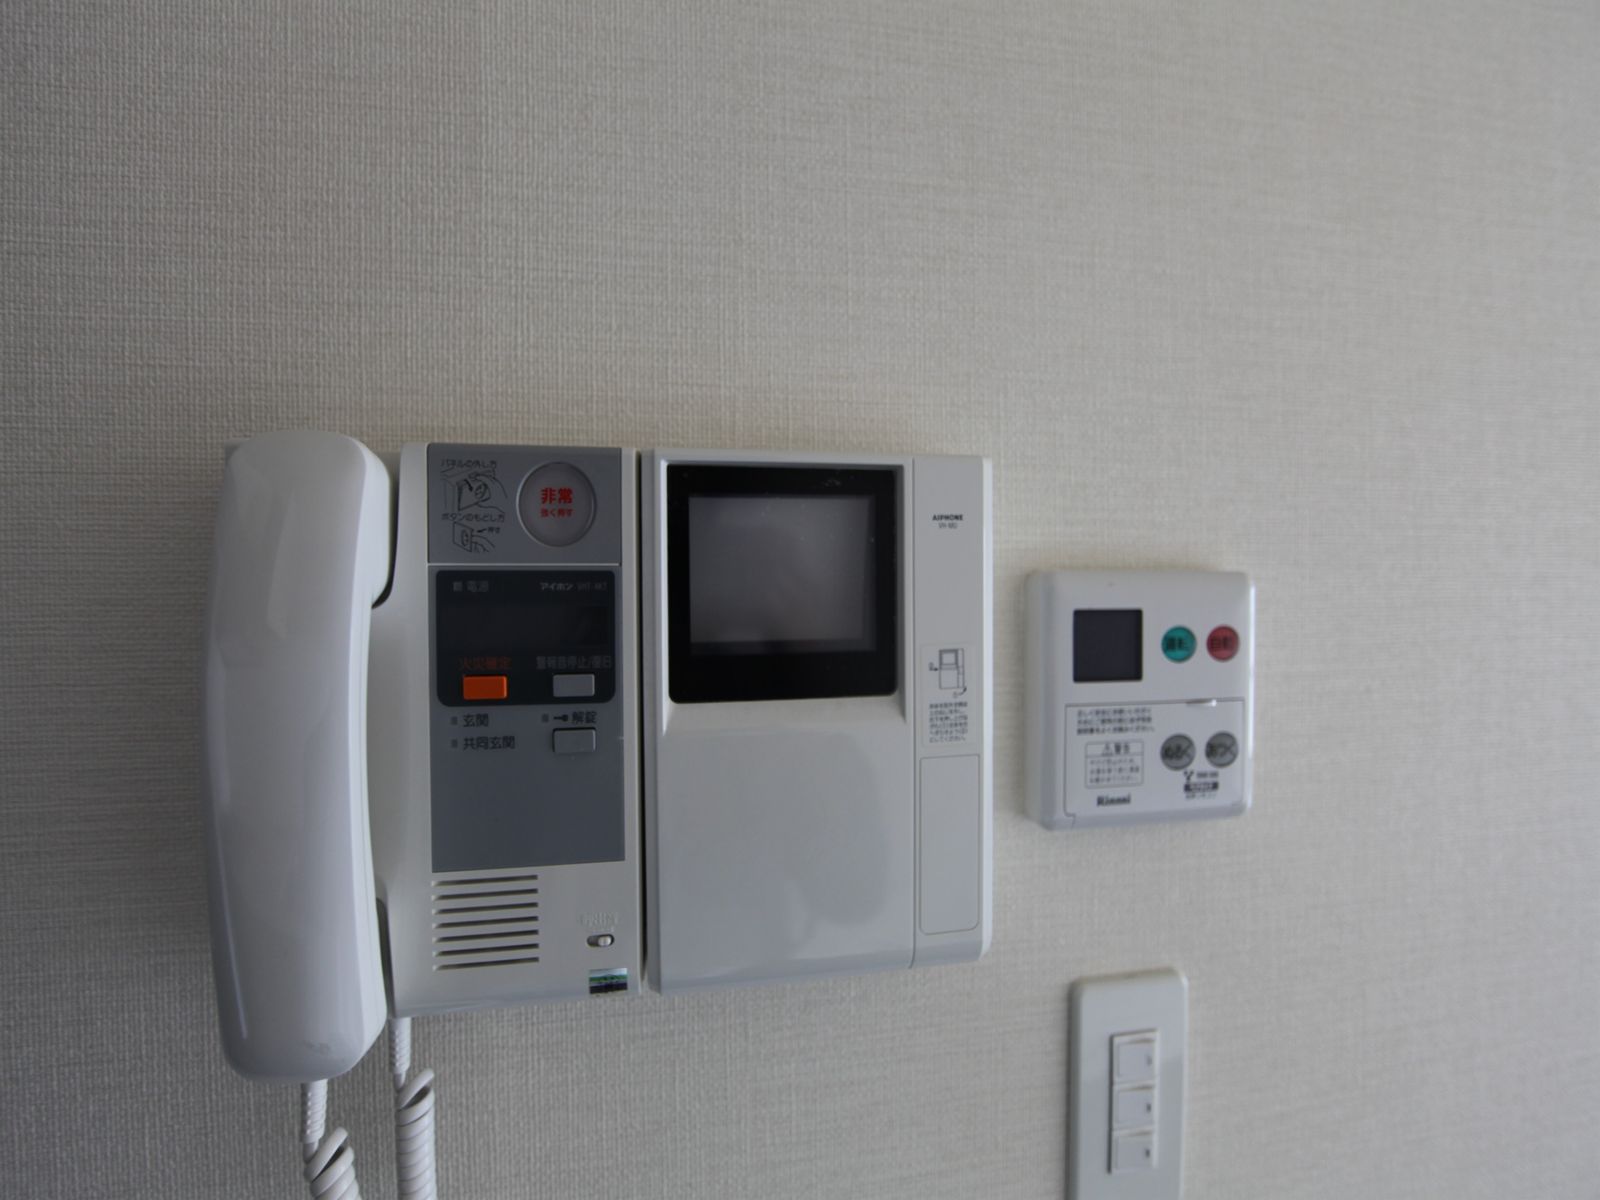 Security. Intercom with TV monitor You can auto-unlocking